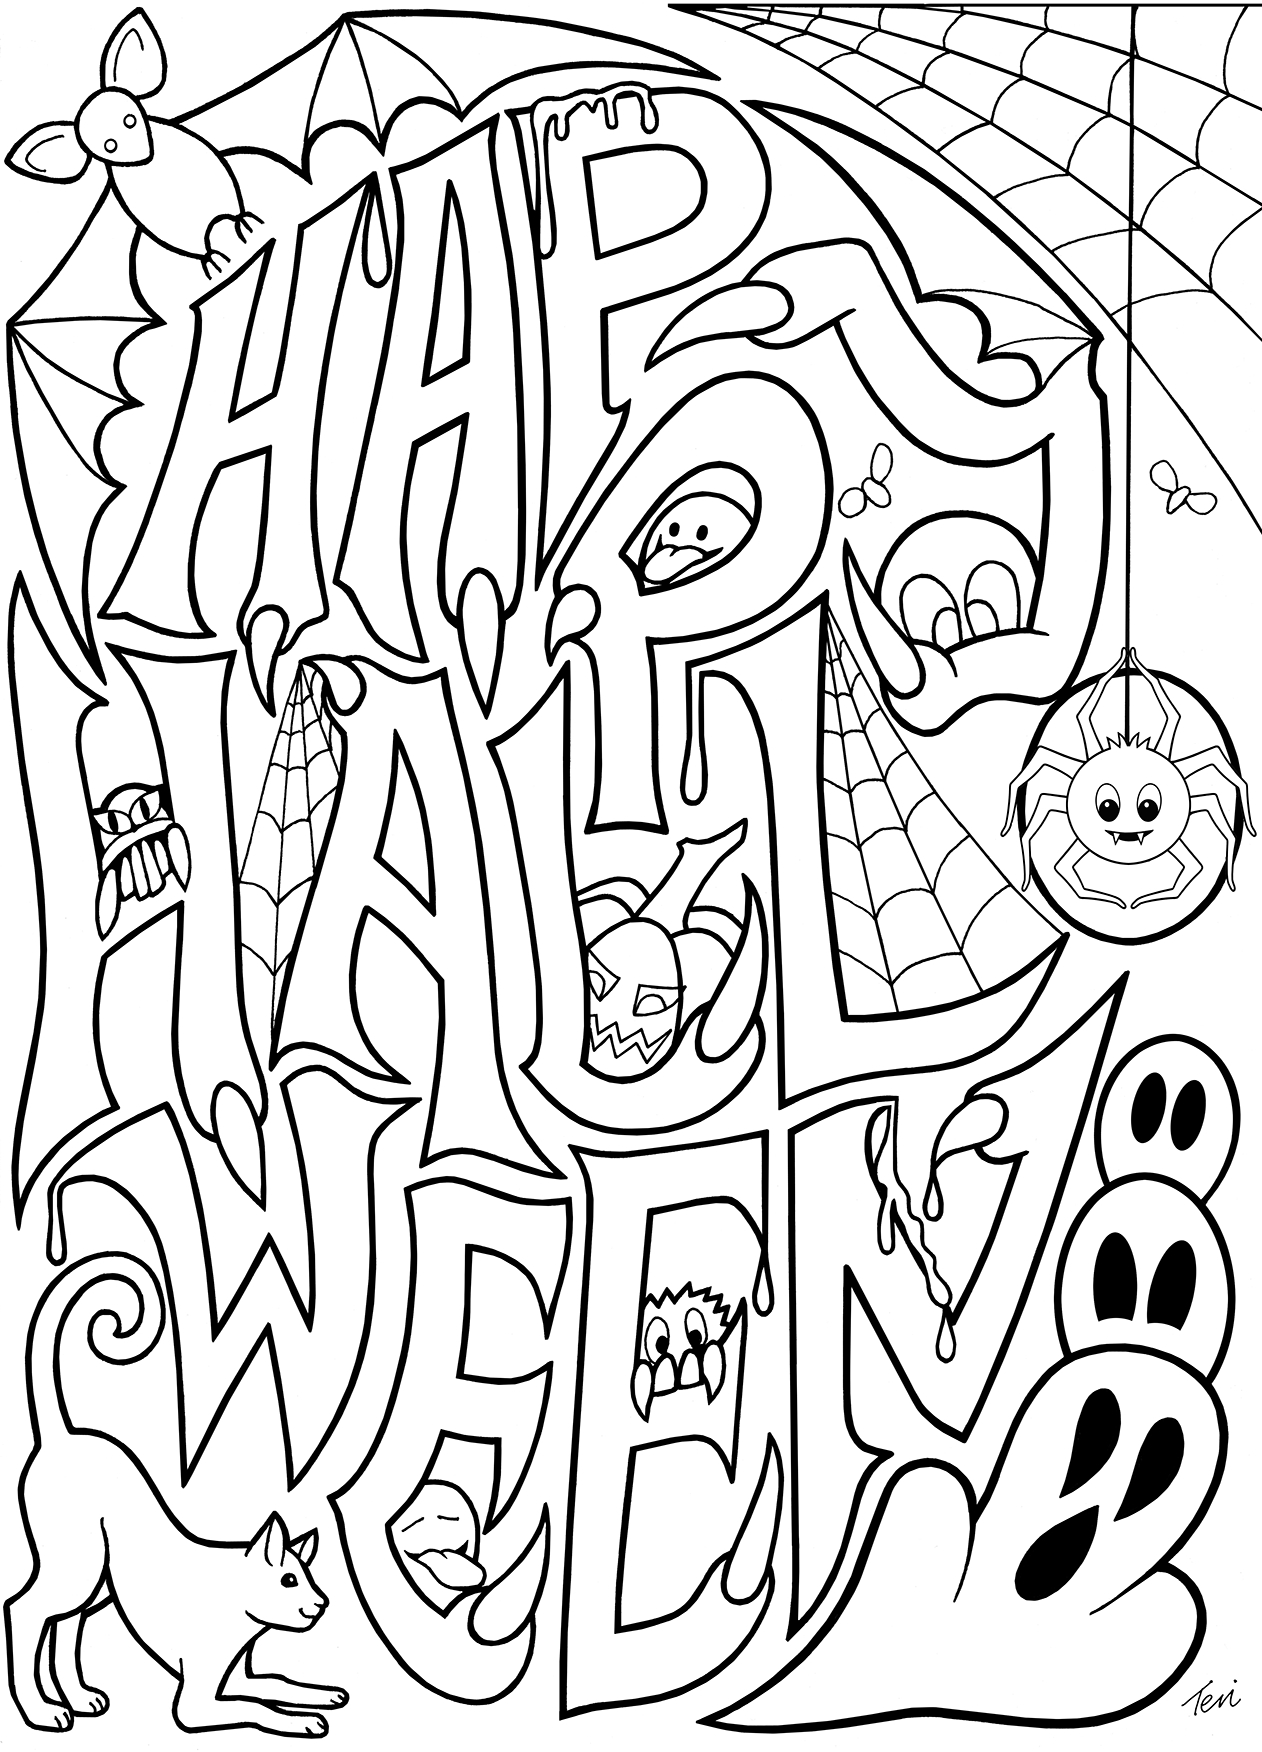 Free Adult Coloring Book Pages #happy #halloweenblue Star - Free Printable Halloween Coloring Pages